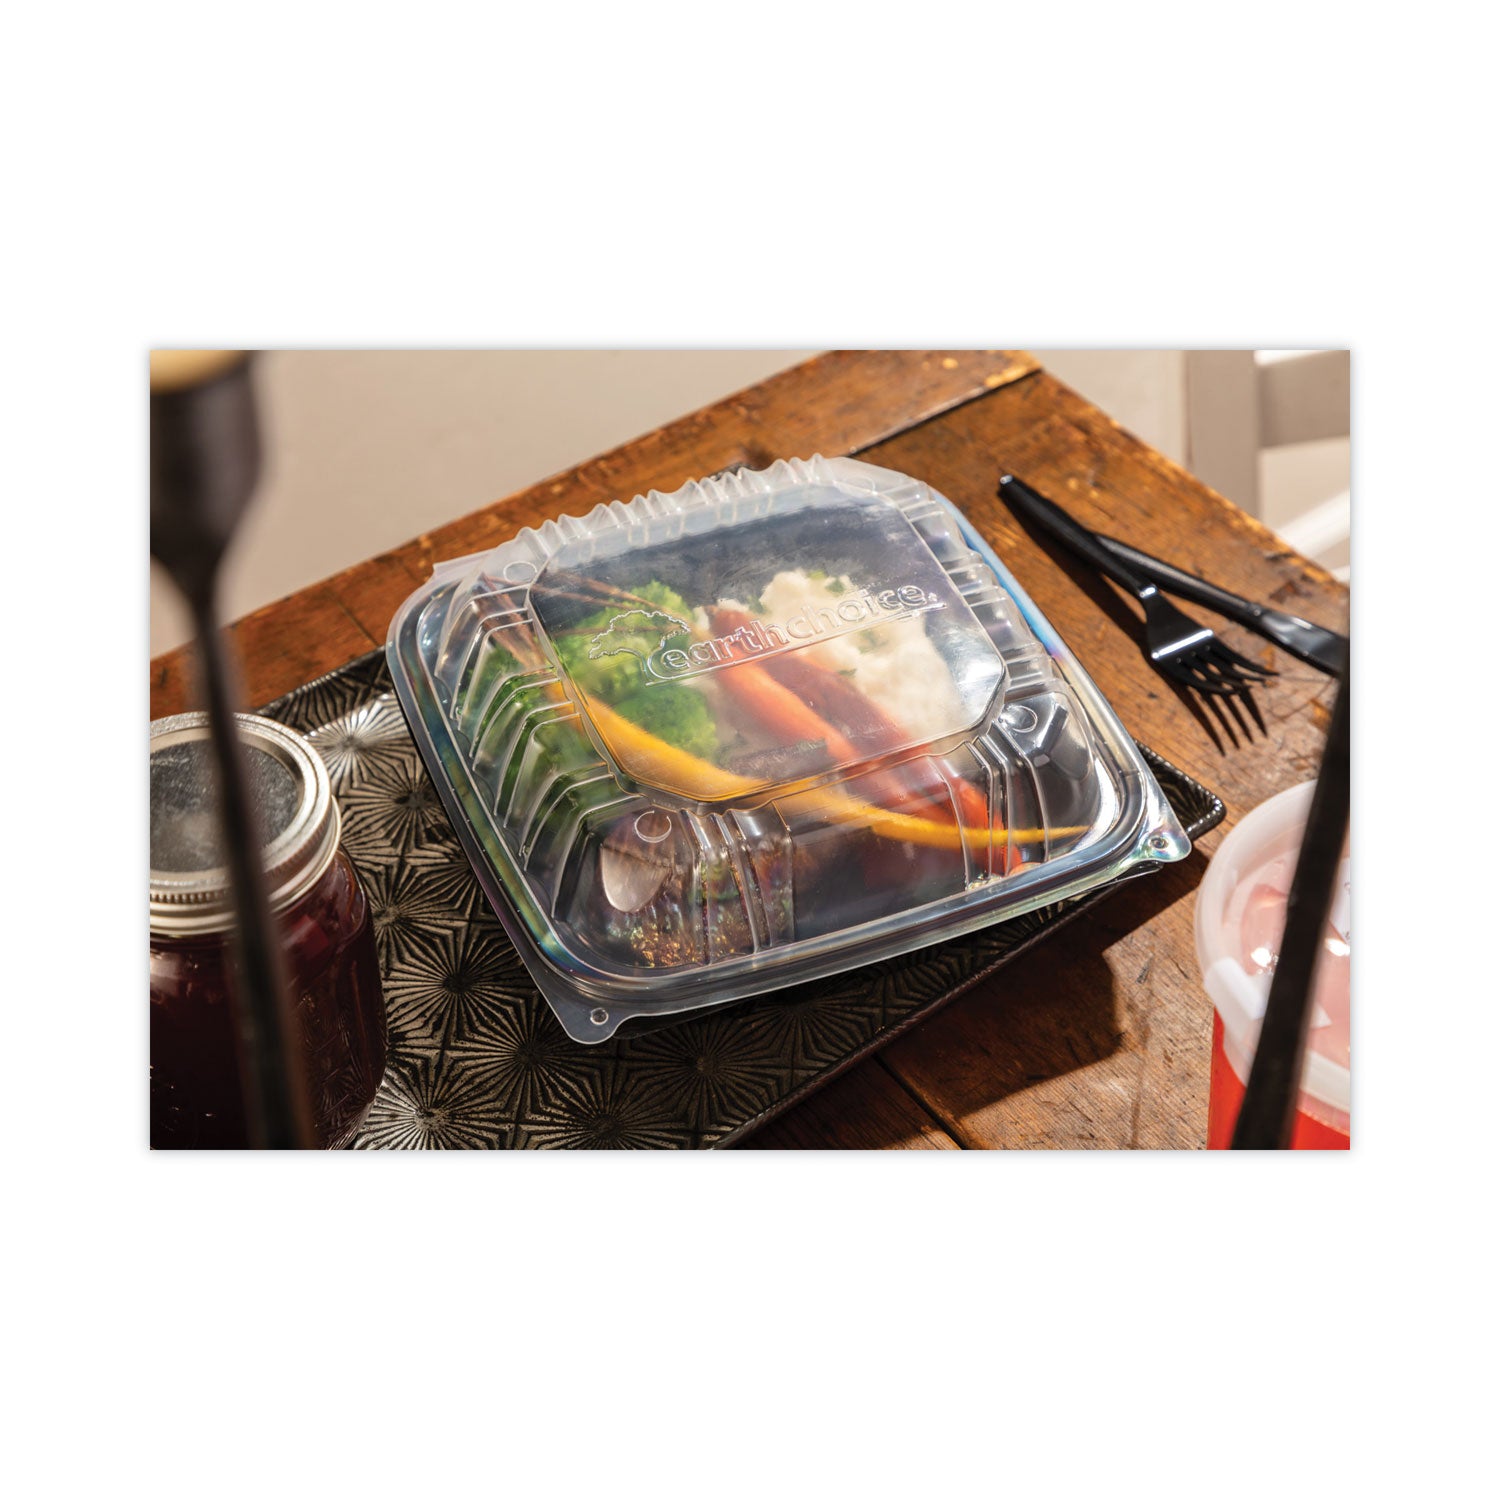 earthchoice-vented-dual-color-microwavable-hinged-lid-container-1-compartment-38oz-85x85x3-black-clear-plastic-150-ct_pctdc858100b000 - 8